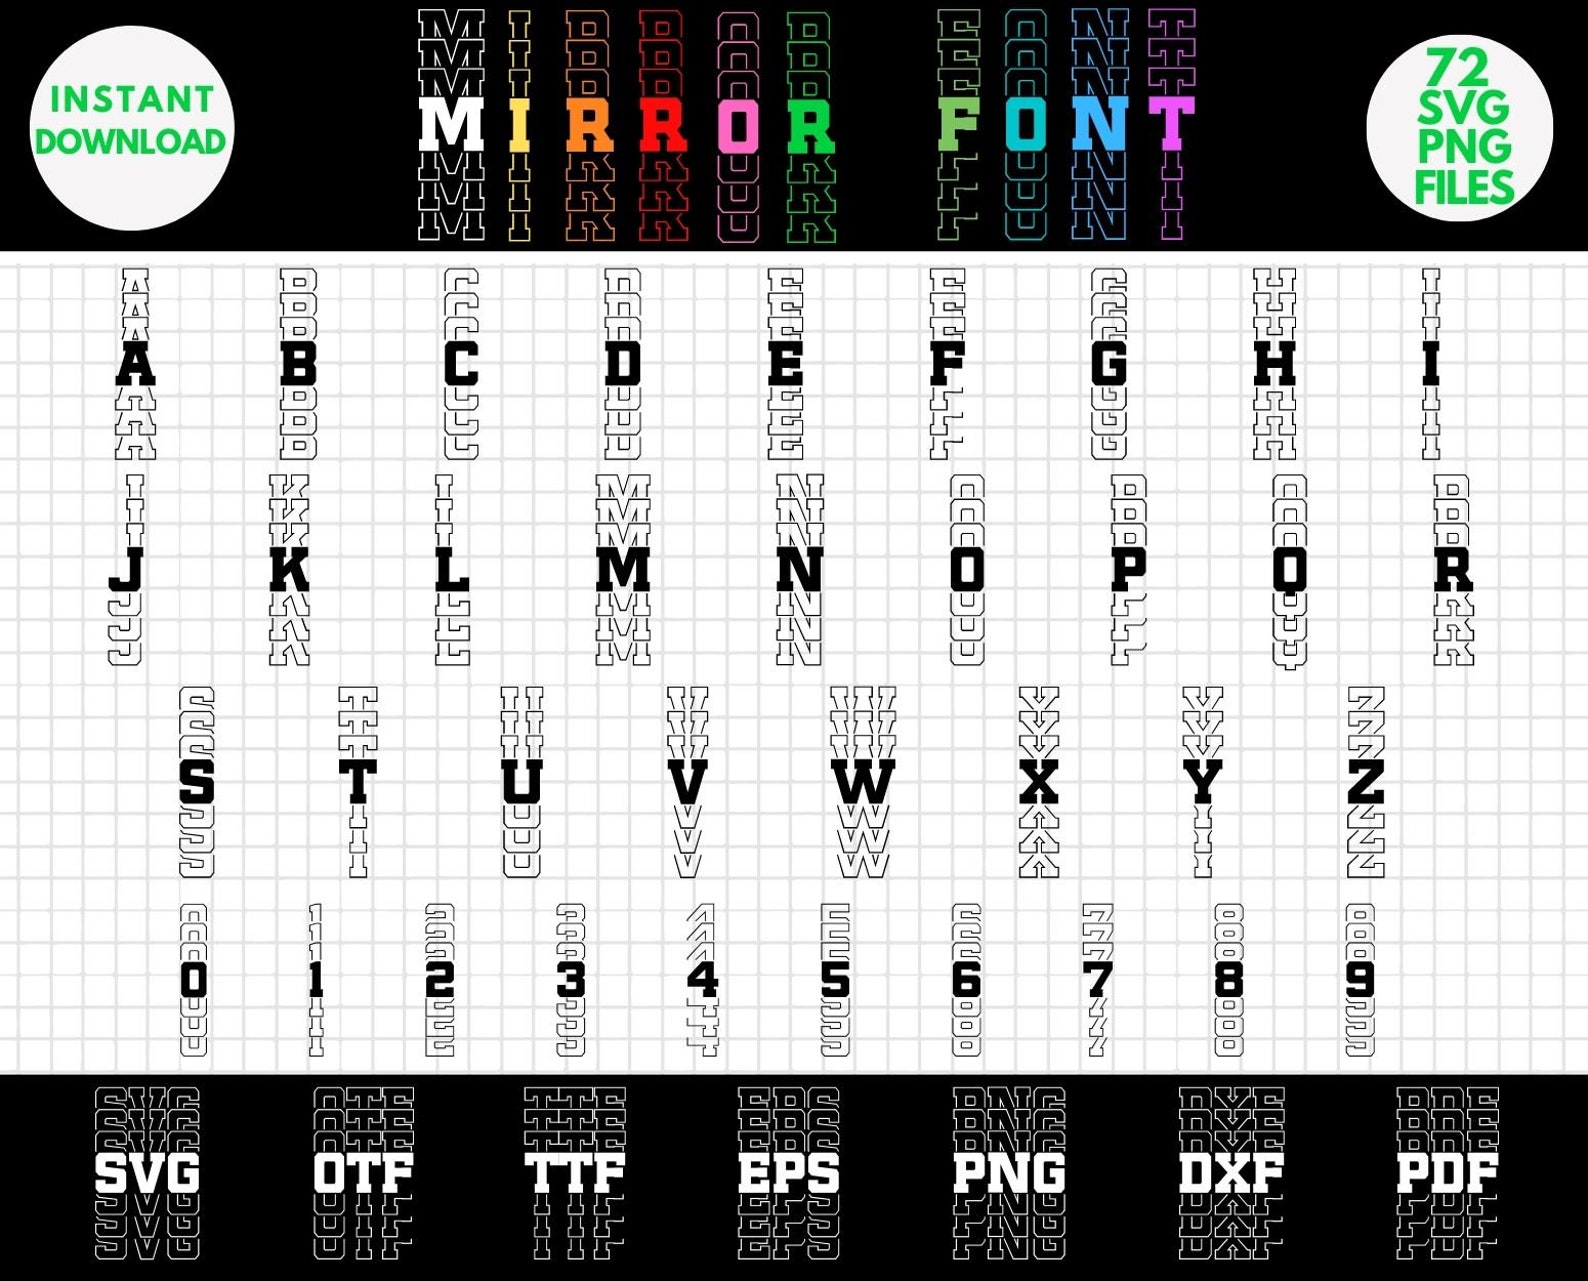 Mirror Font, Mirror Font SVG, Stacked Font SVG, Stacked Font, Stacked ...